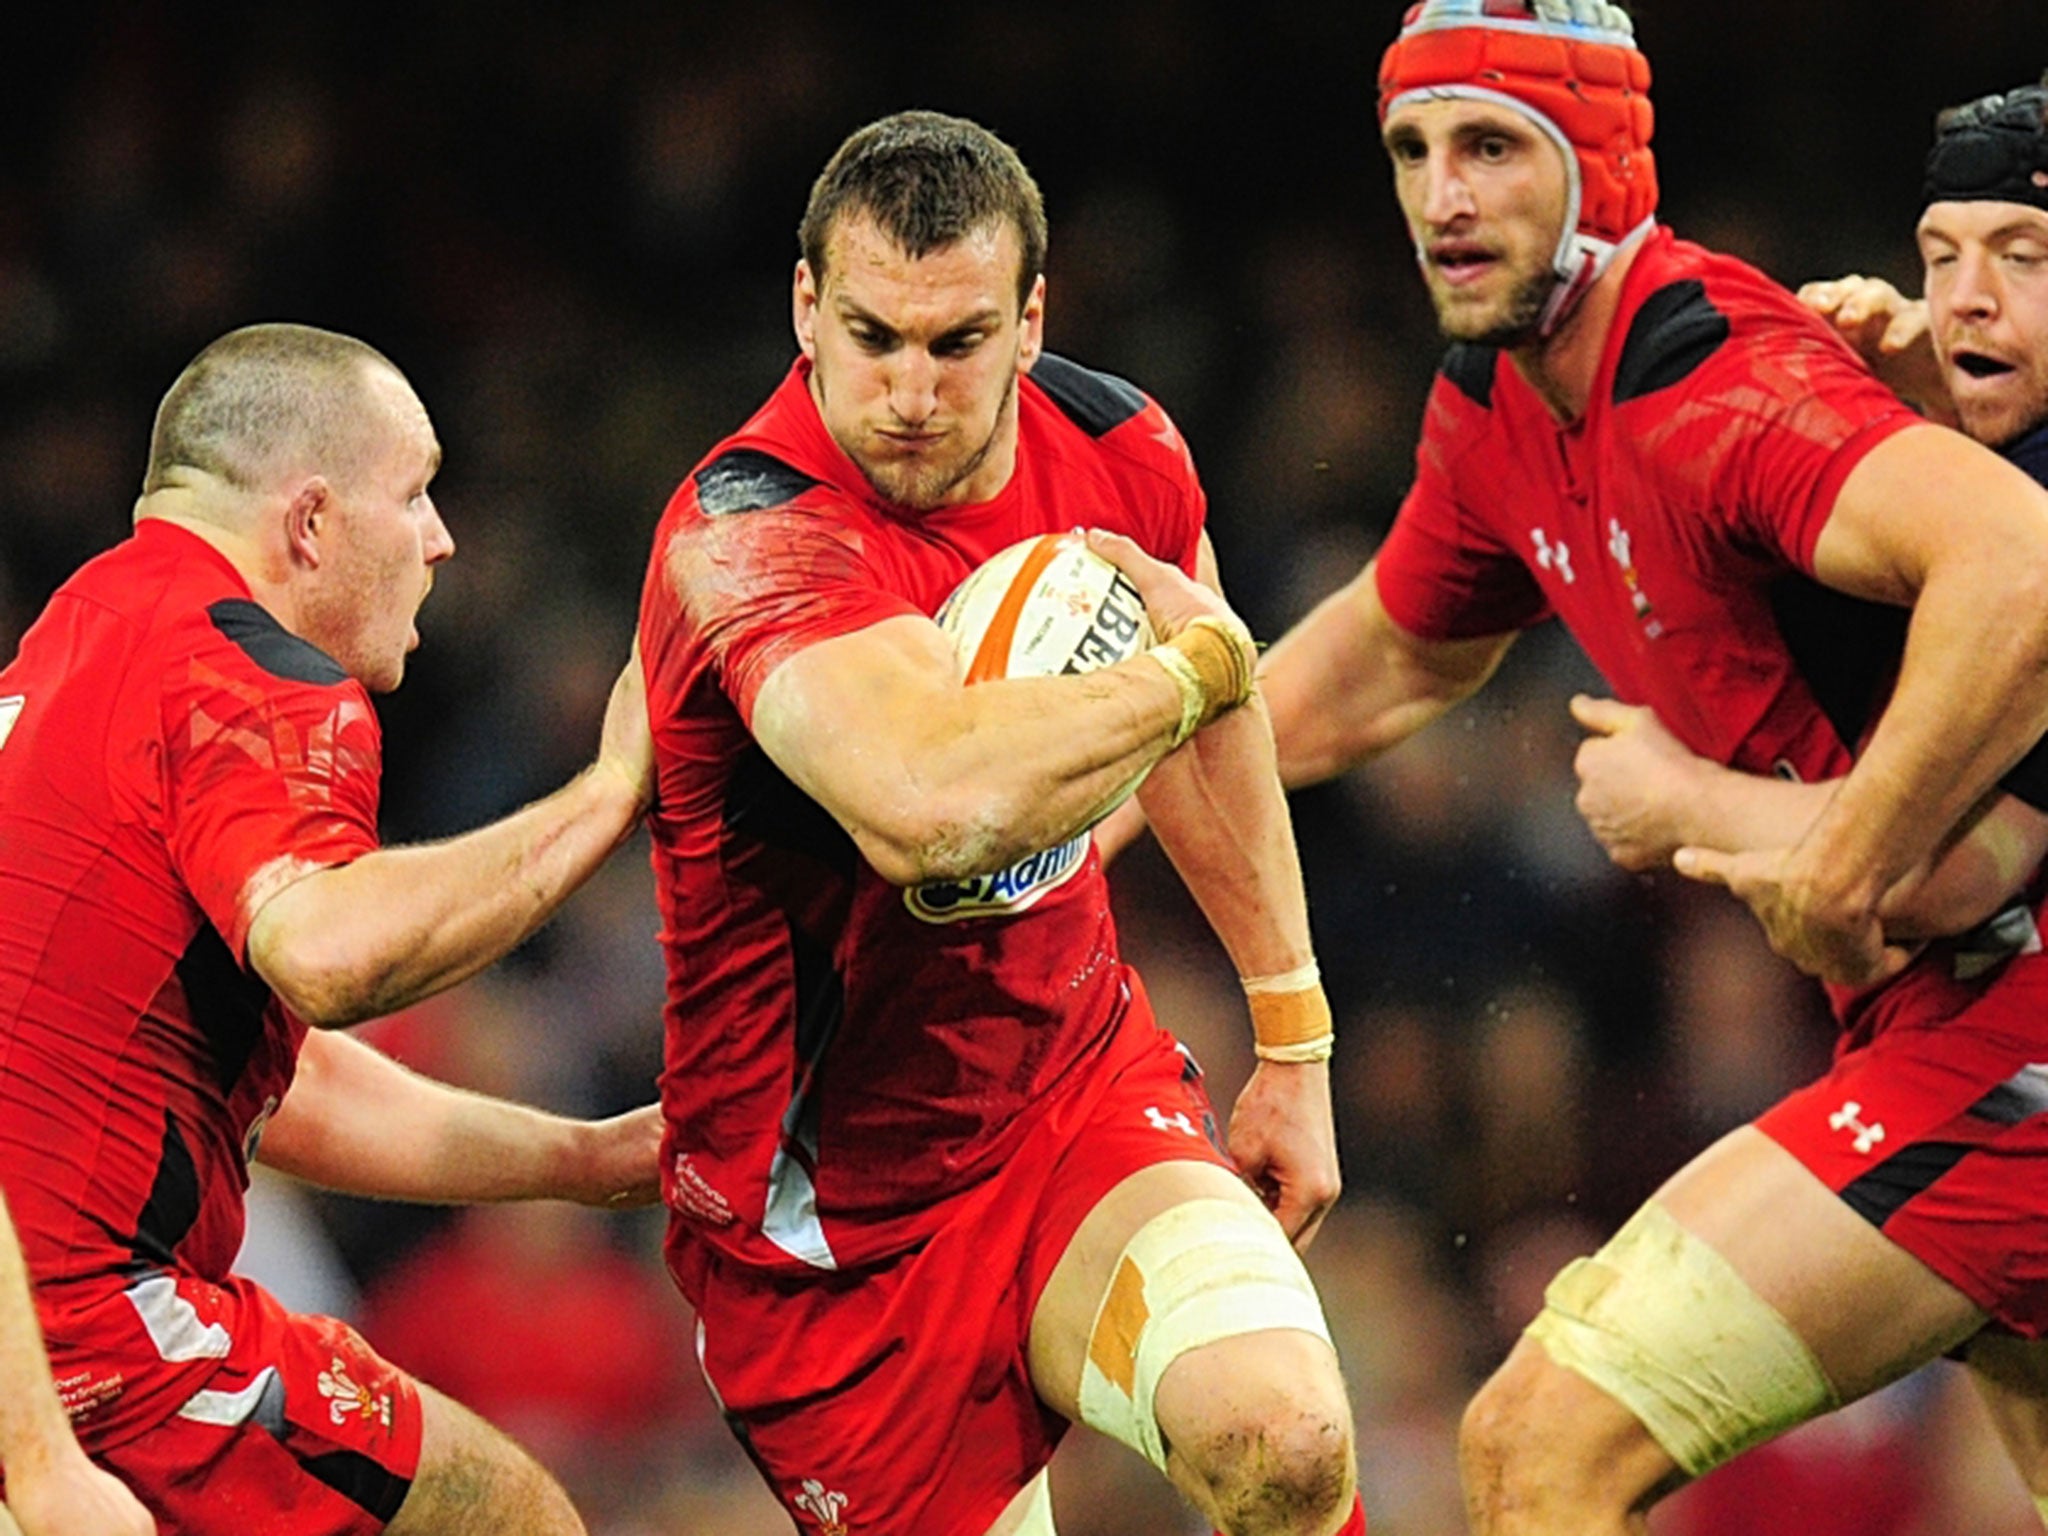 The Wales captain, Sam Warburton, is free to play for his club, Cardiff Blues, again after an agreement between regional teams and the WRU was signed today